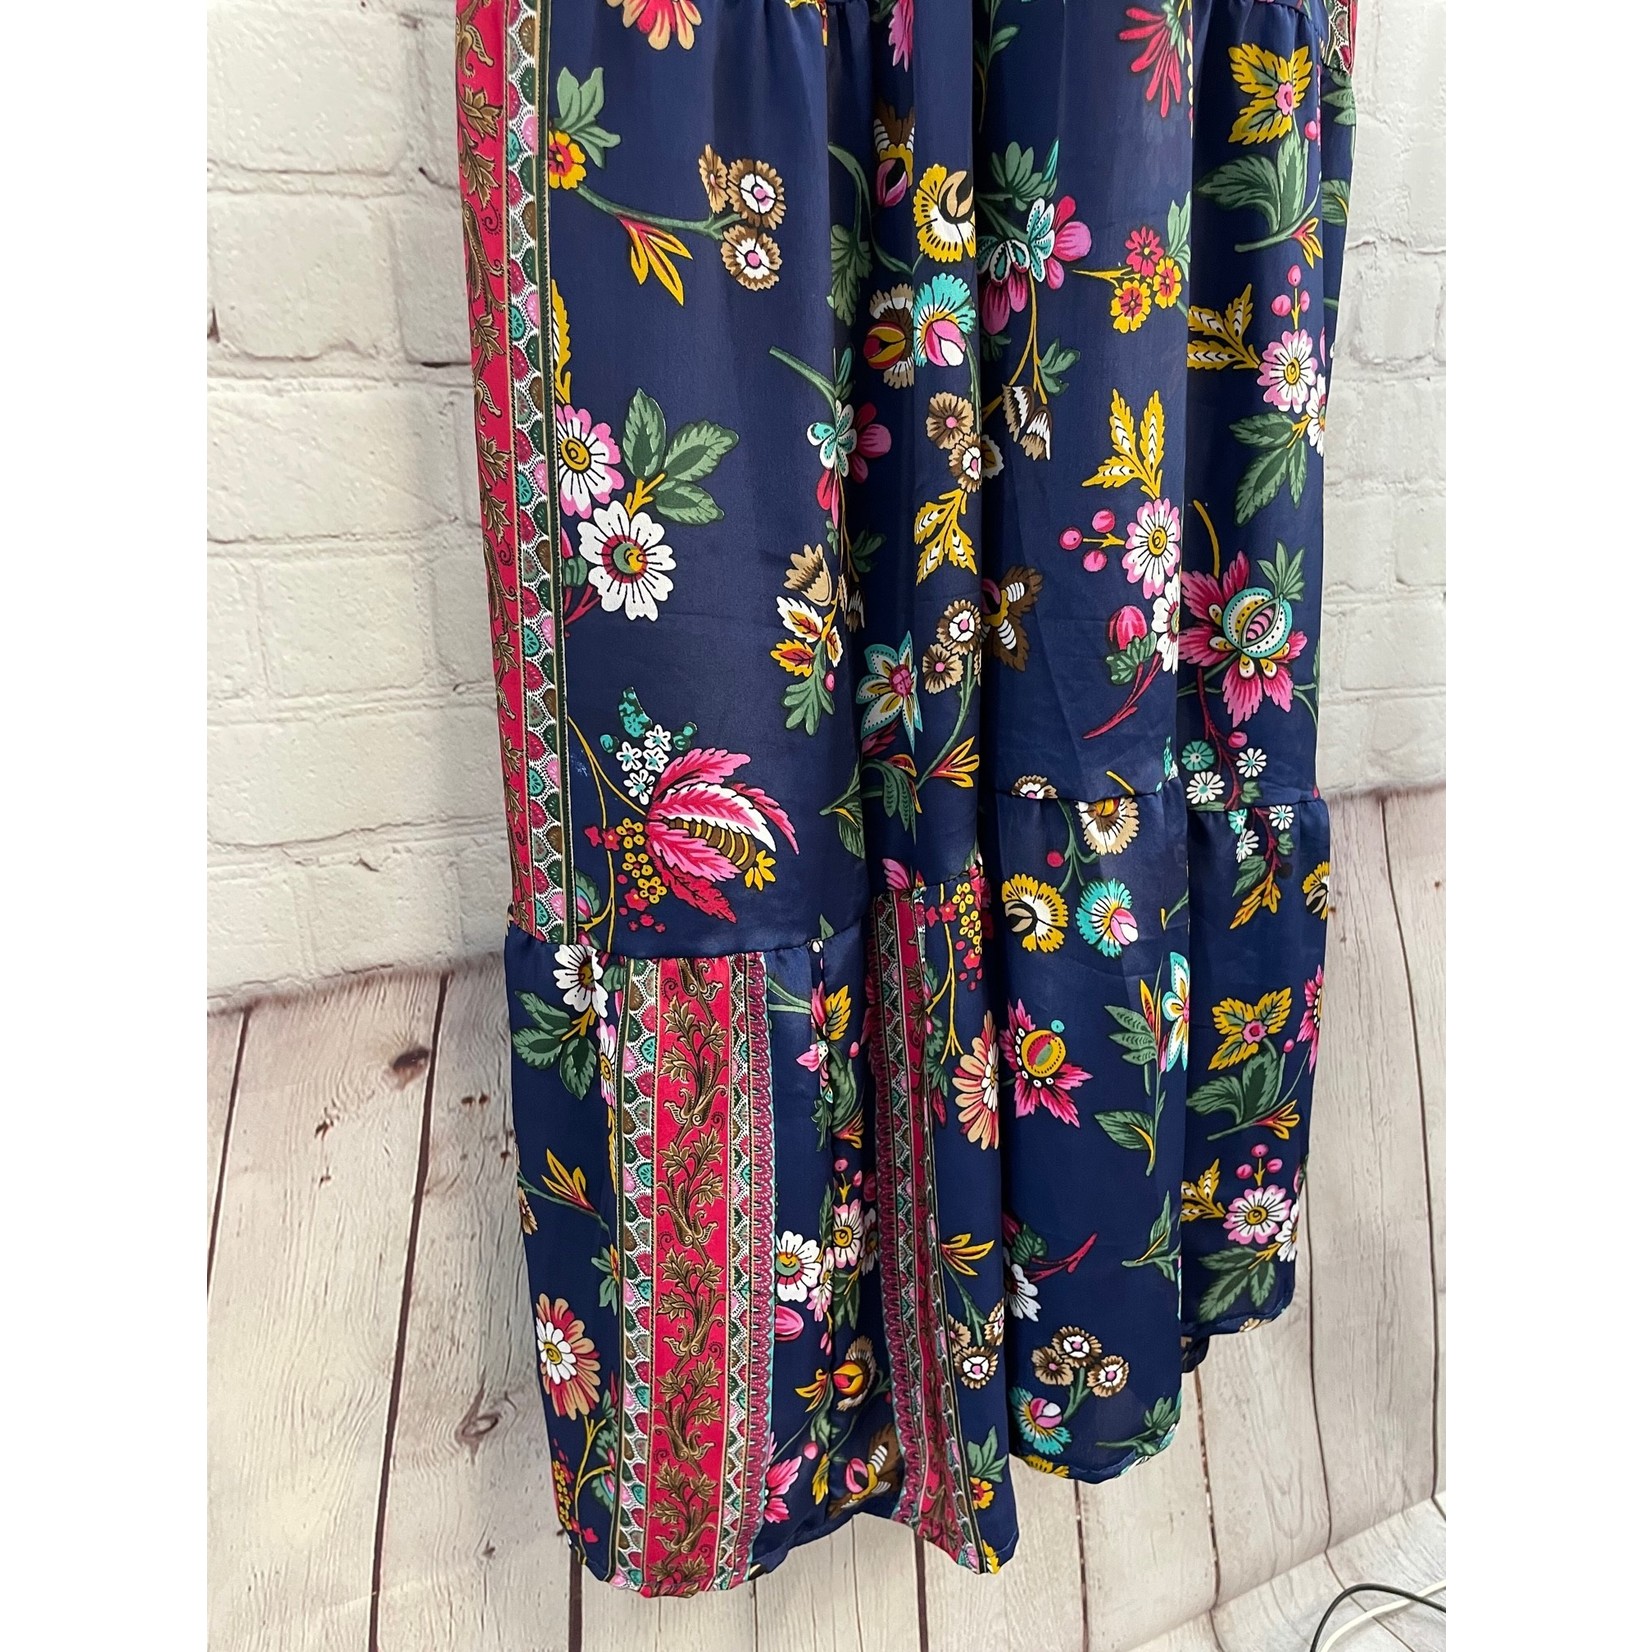 Anna and Rose, Blue, Floral, Maxi, Large